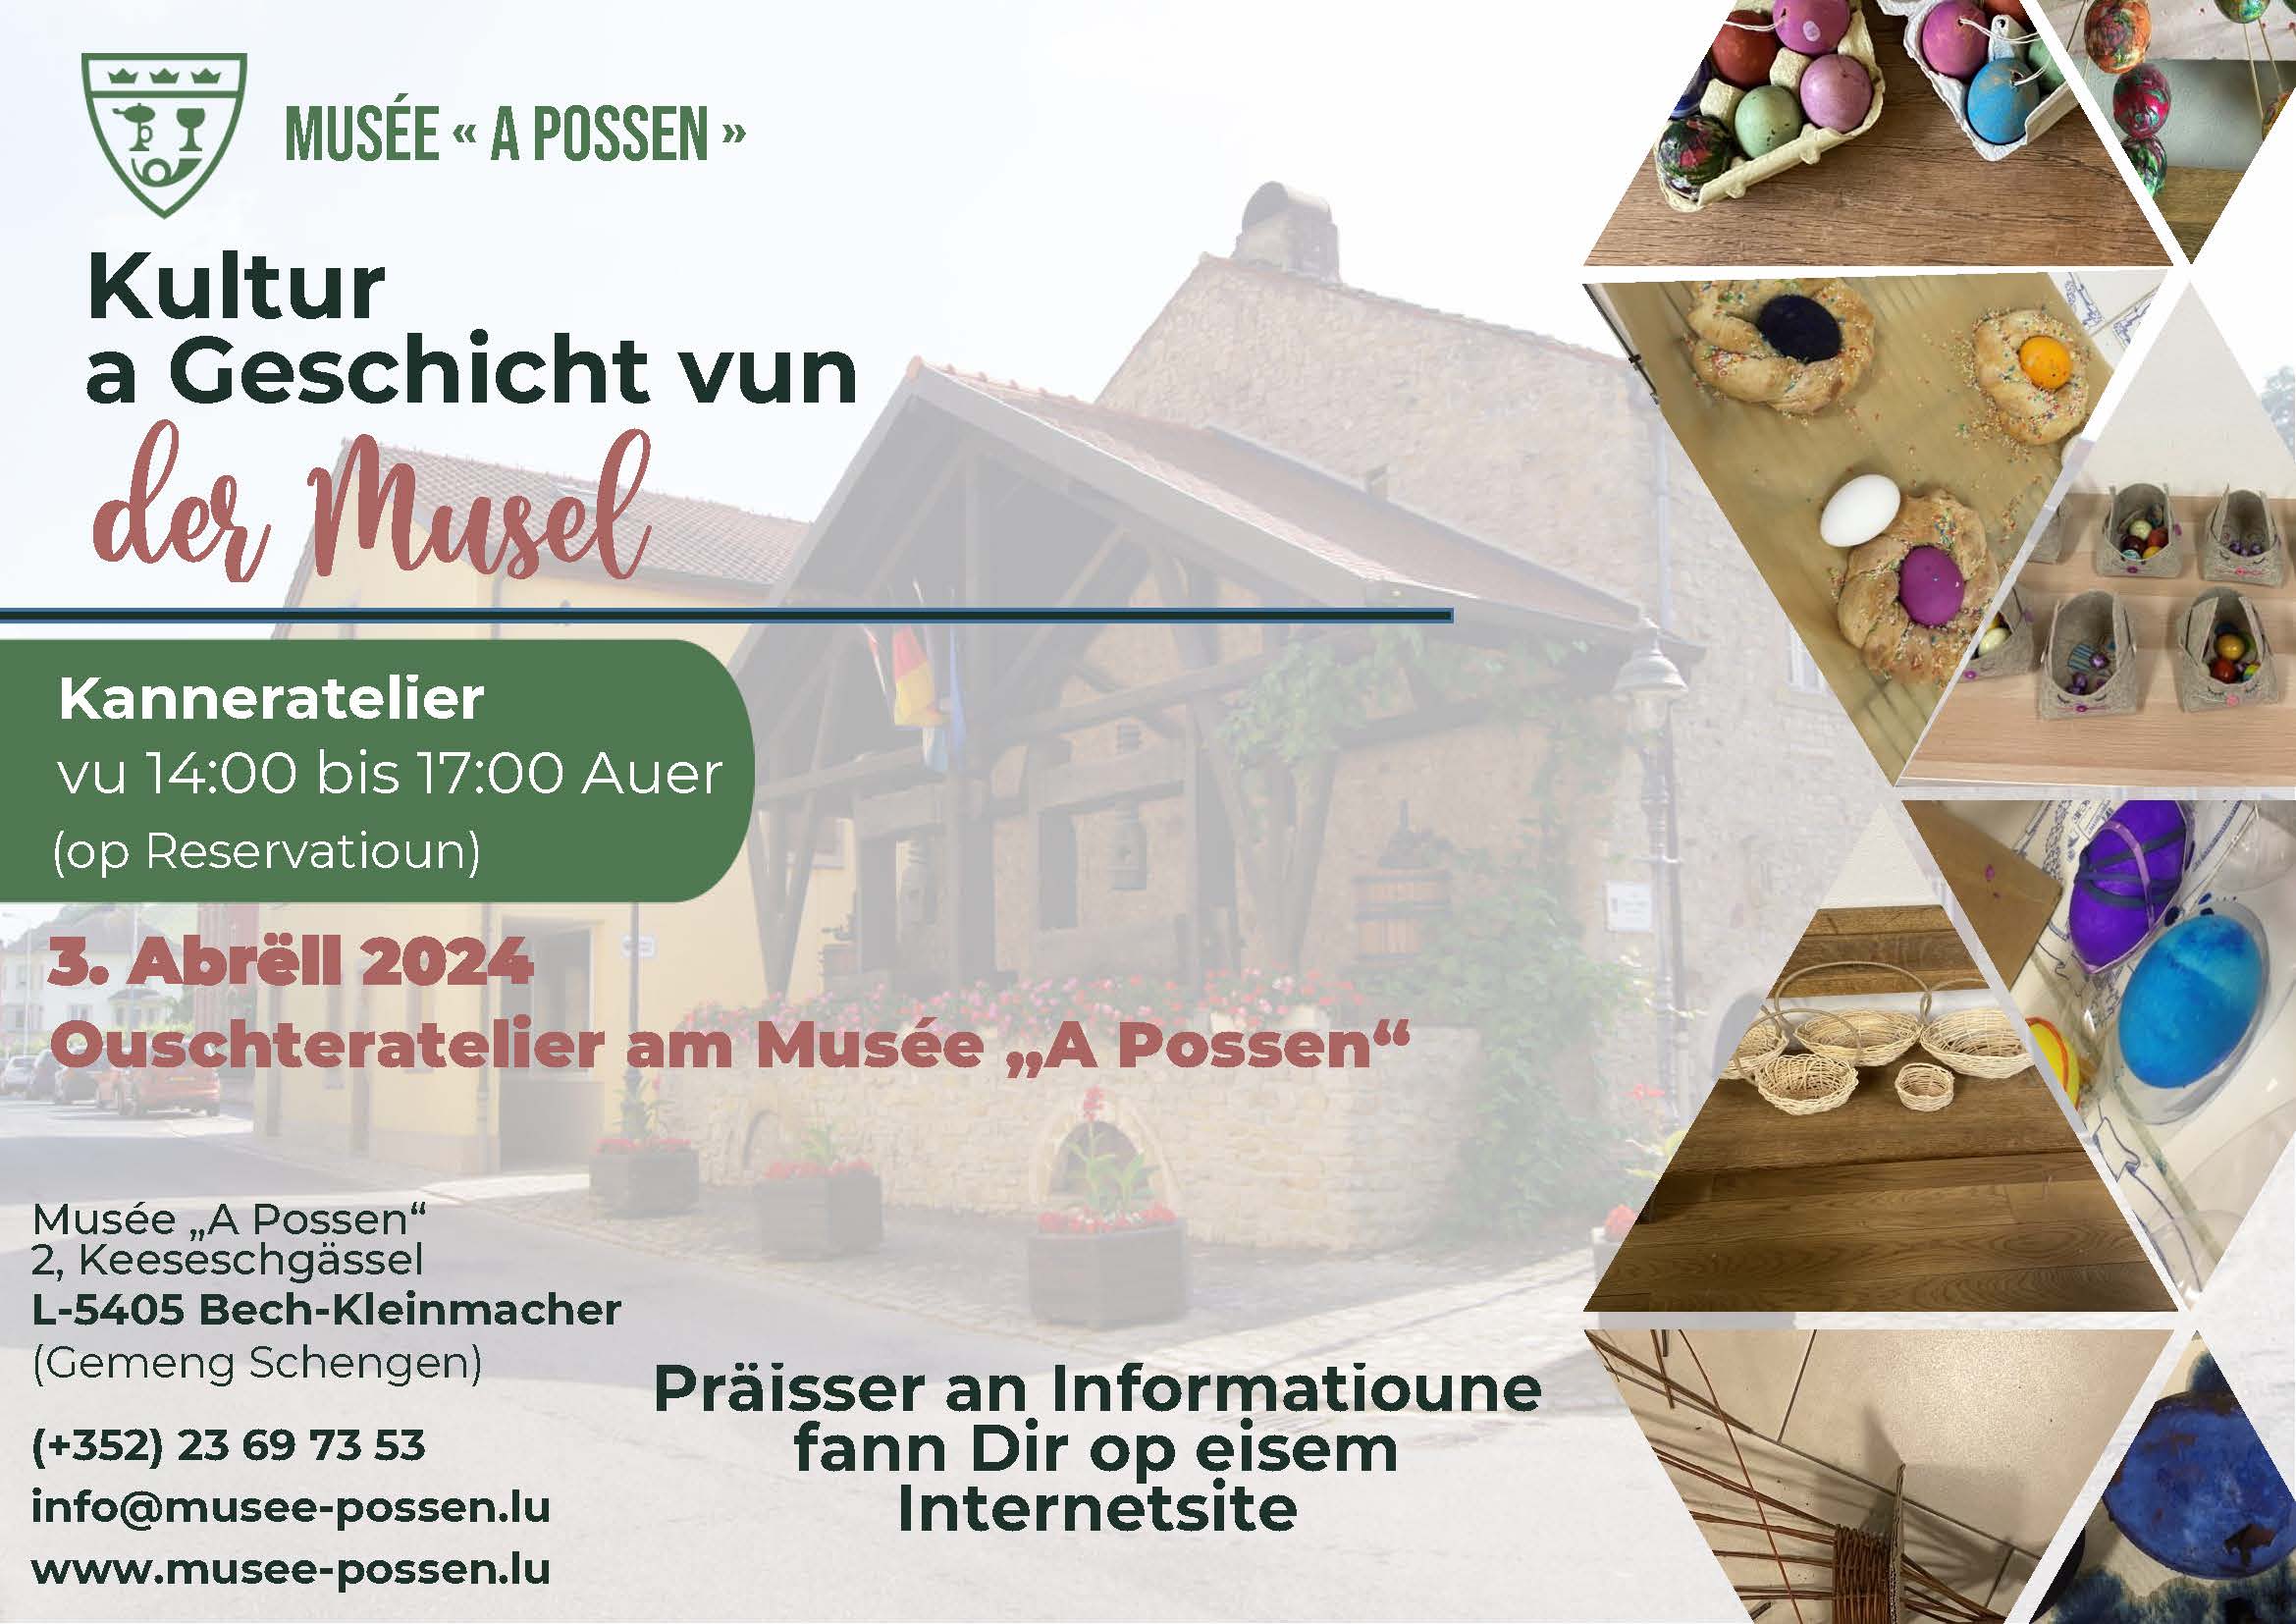 Easter workshop at the museum "A Possen"